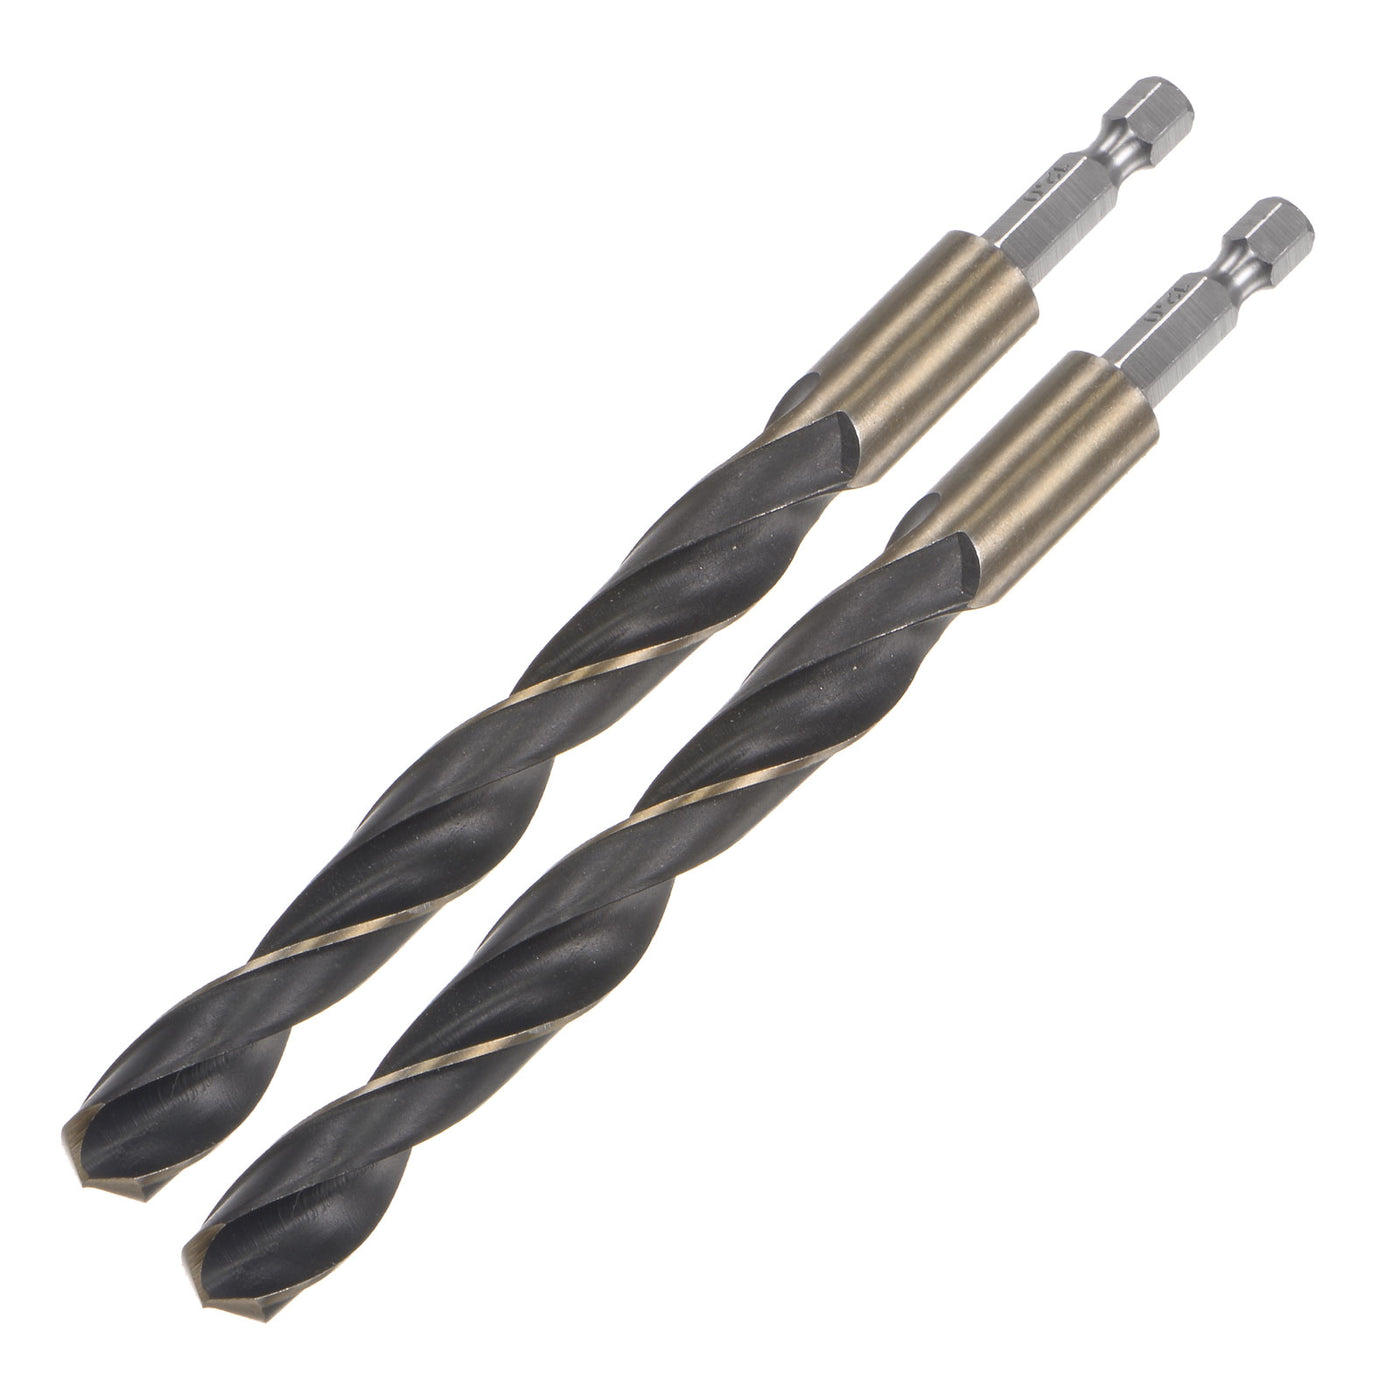 uxcell Uxcell 2Pcs 12mm High Speed Steel Twist Drill Bit with Hex Shank 150mm Length